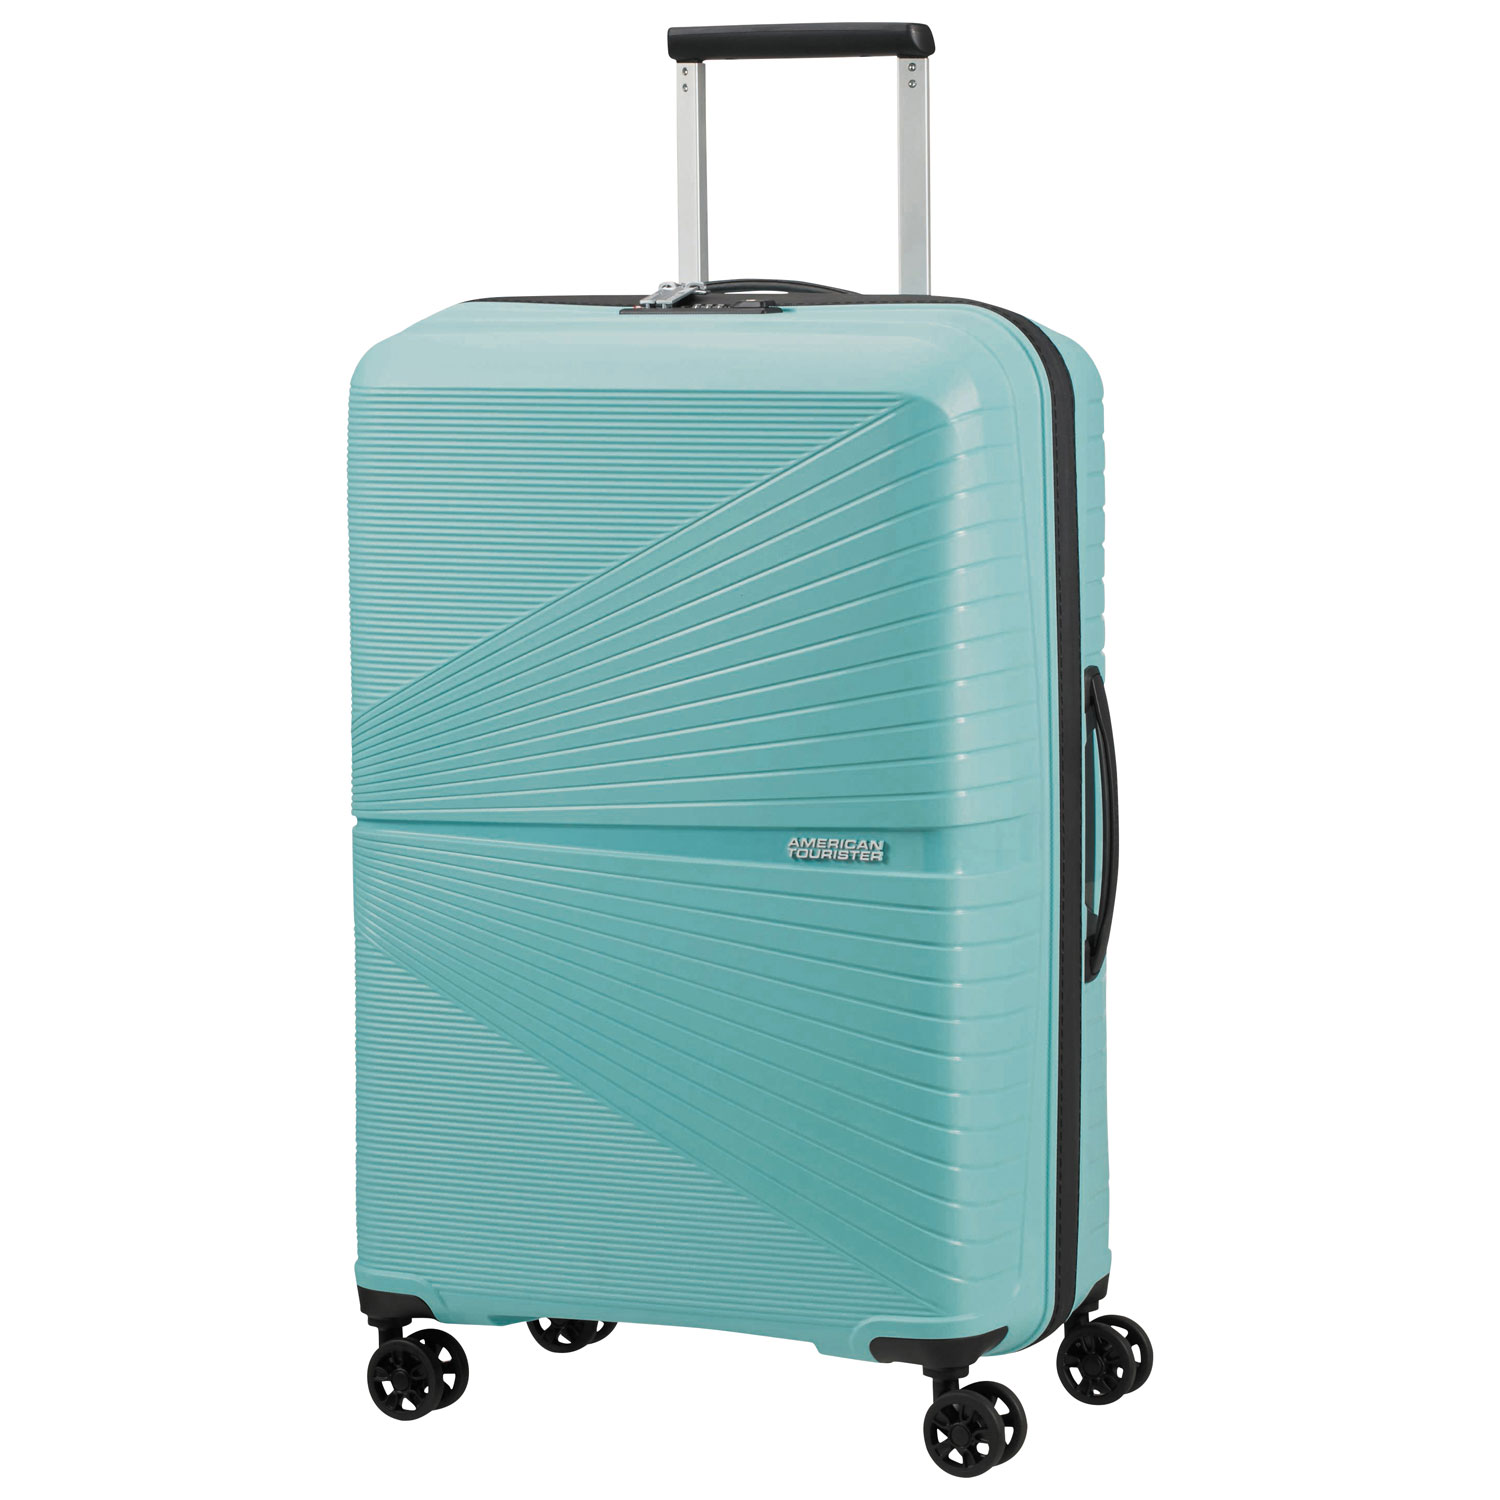 American Tourister Airconic 24" Hard Side Carry-On Luggage - Purist Blue